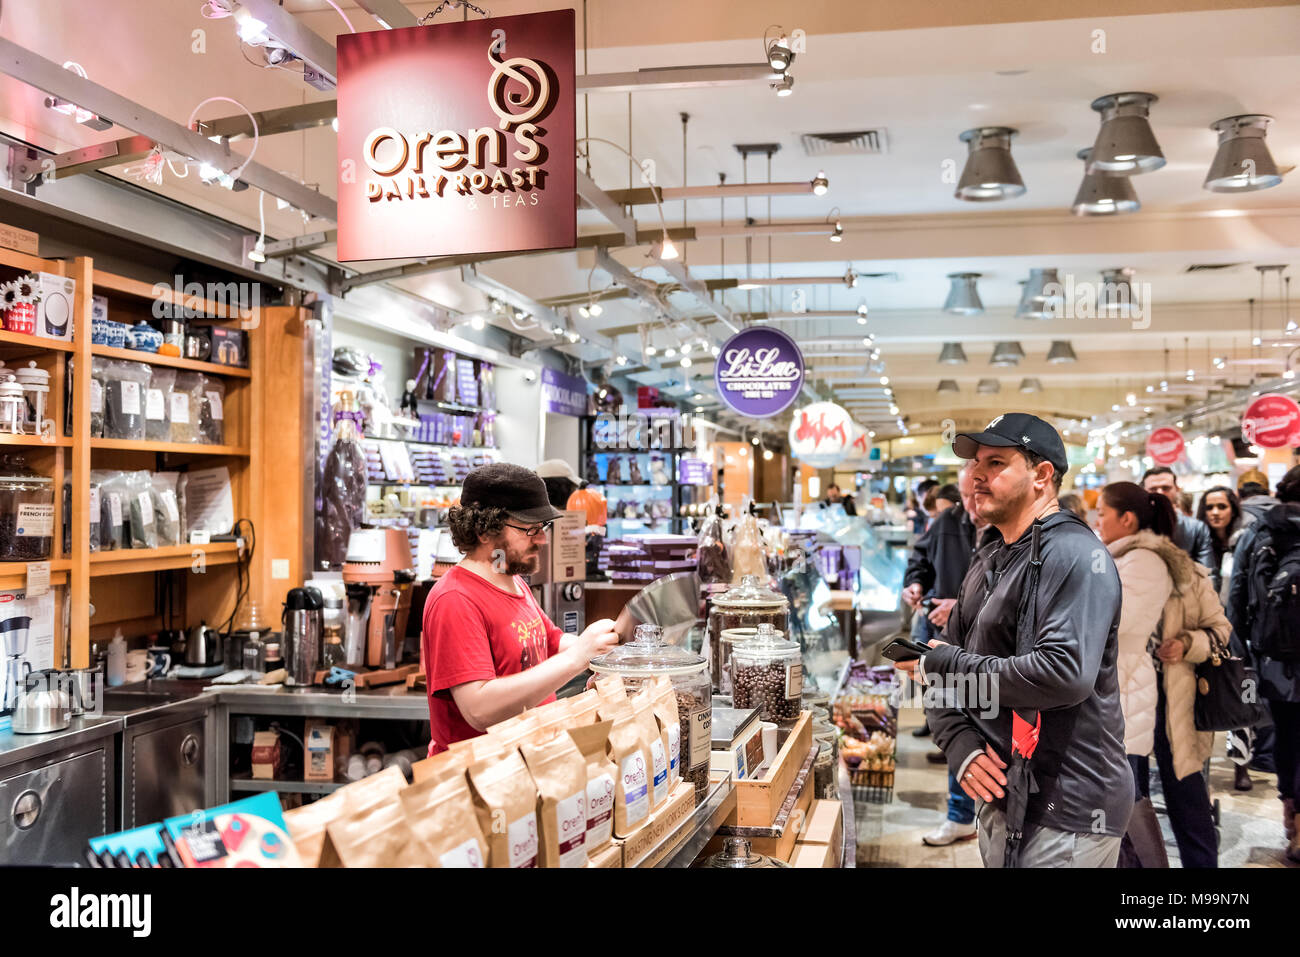 New York, USA - October 29, 2017: Grand Central Market in New York City with signs, people buying inside shops tea coffee Stock Photo